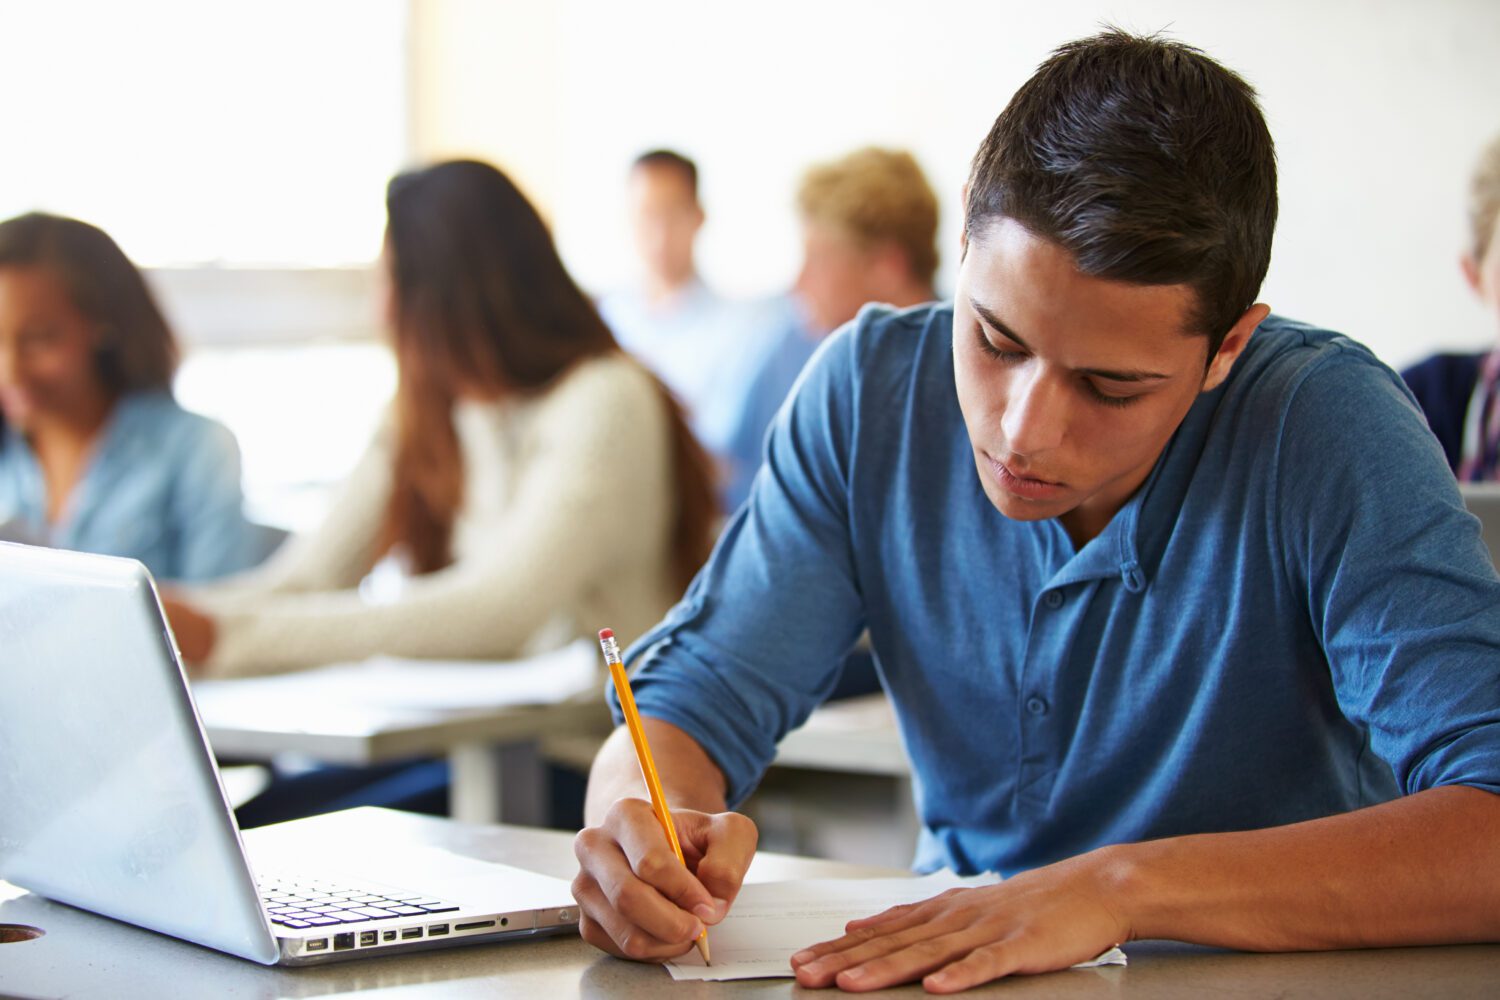 This image appears to be from a classroom. This shows a young male student sitting & appears to be writing on paper with a laptop next to it. He is wearing a blue t-shirt. In the background of the image, there are blurred images of other students.